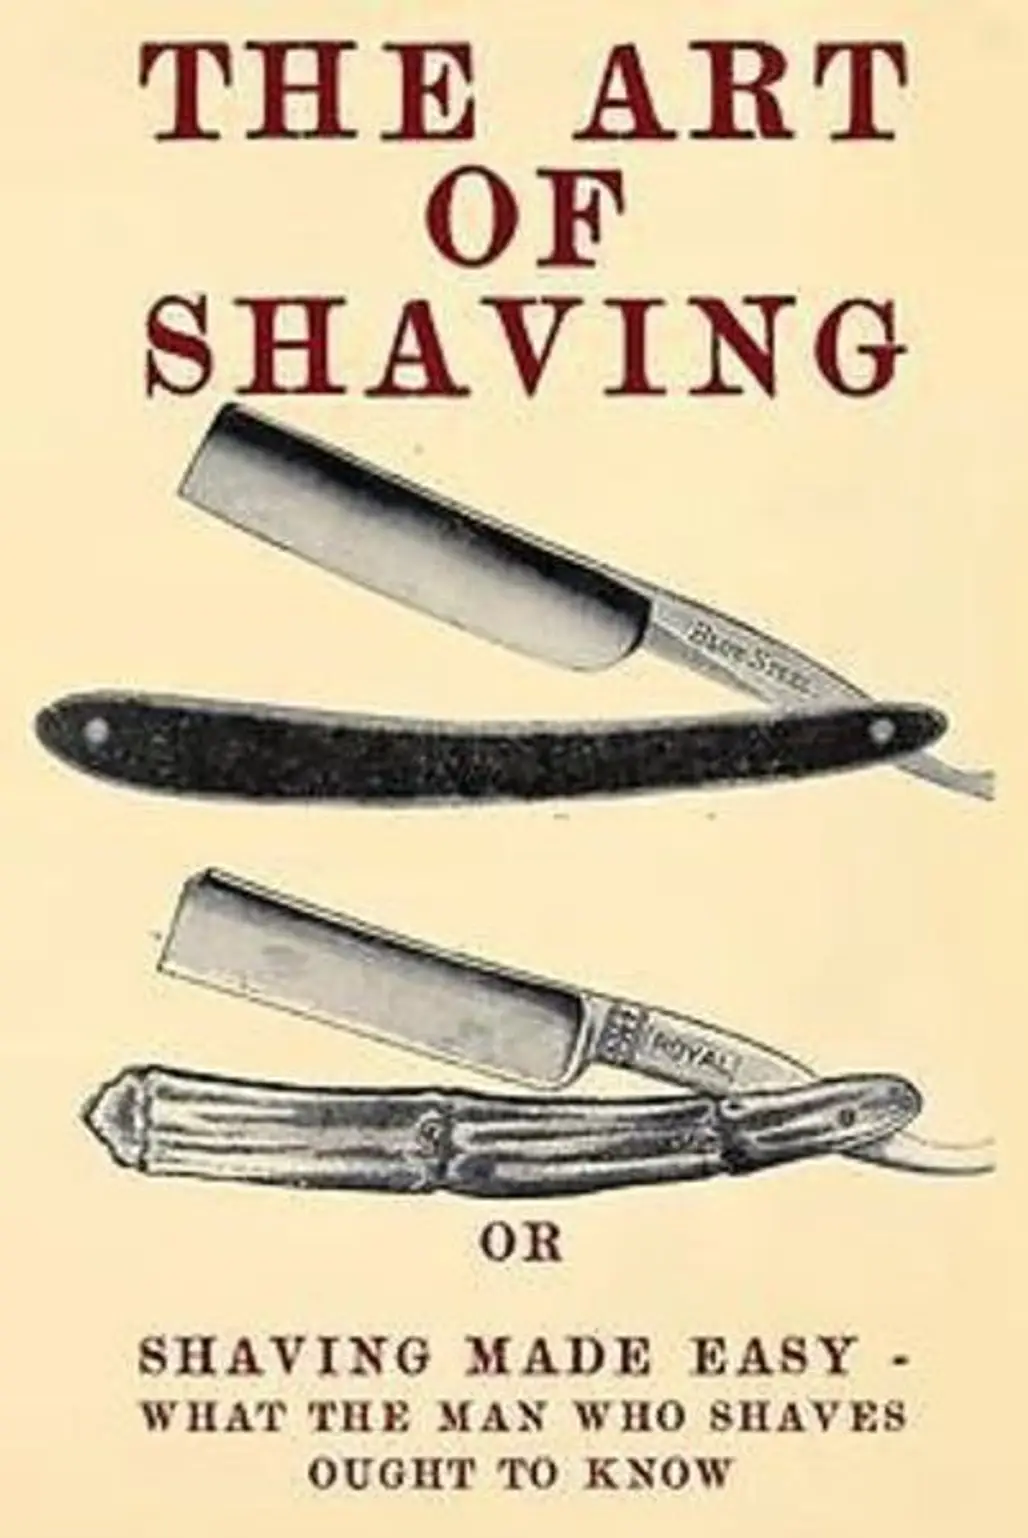 The Art of Shaving: Shaving Made Easy - What the Man Who Shaves Ought to Know